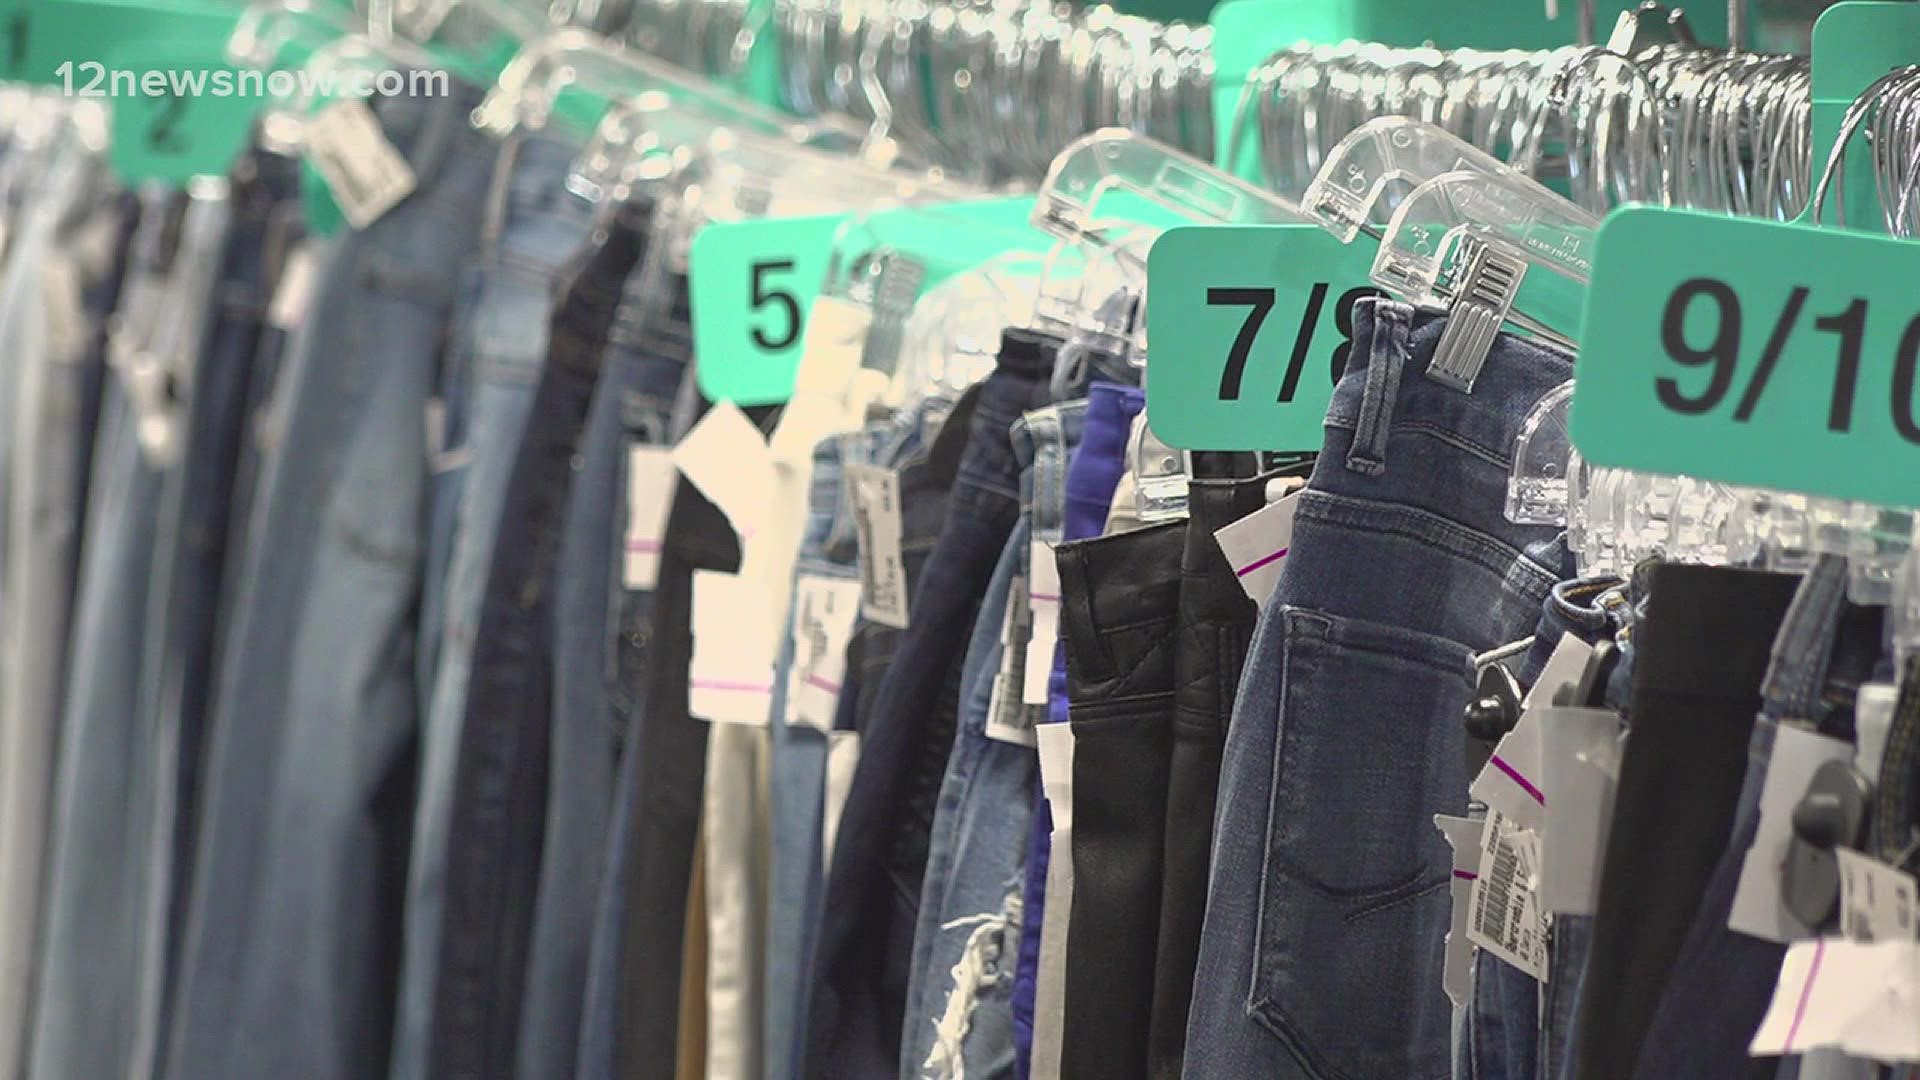 Plato's Closet in Beaumont allows you to exchange clothes for money or store credit.